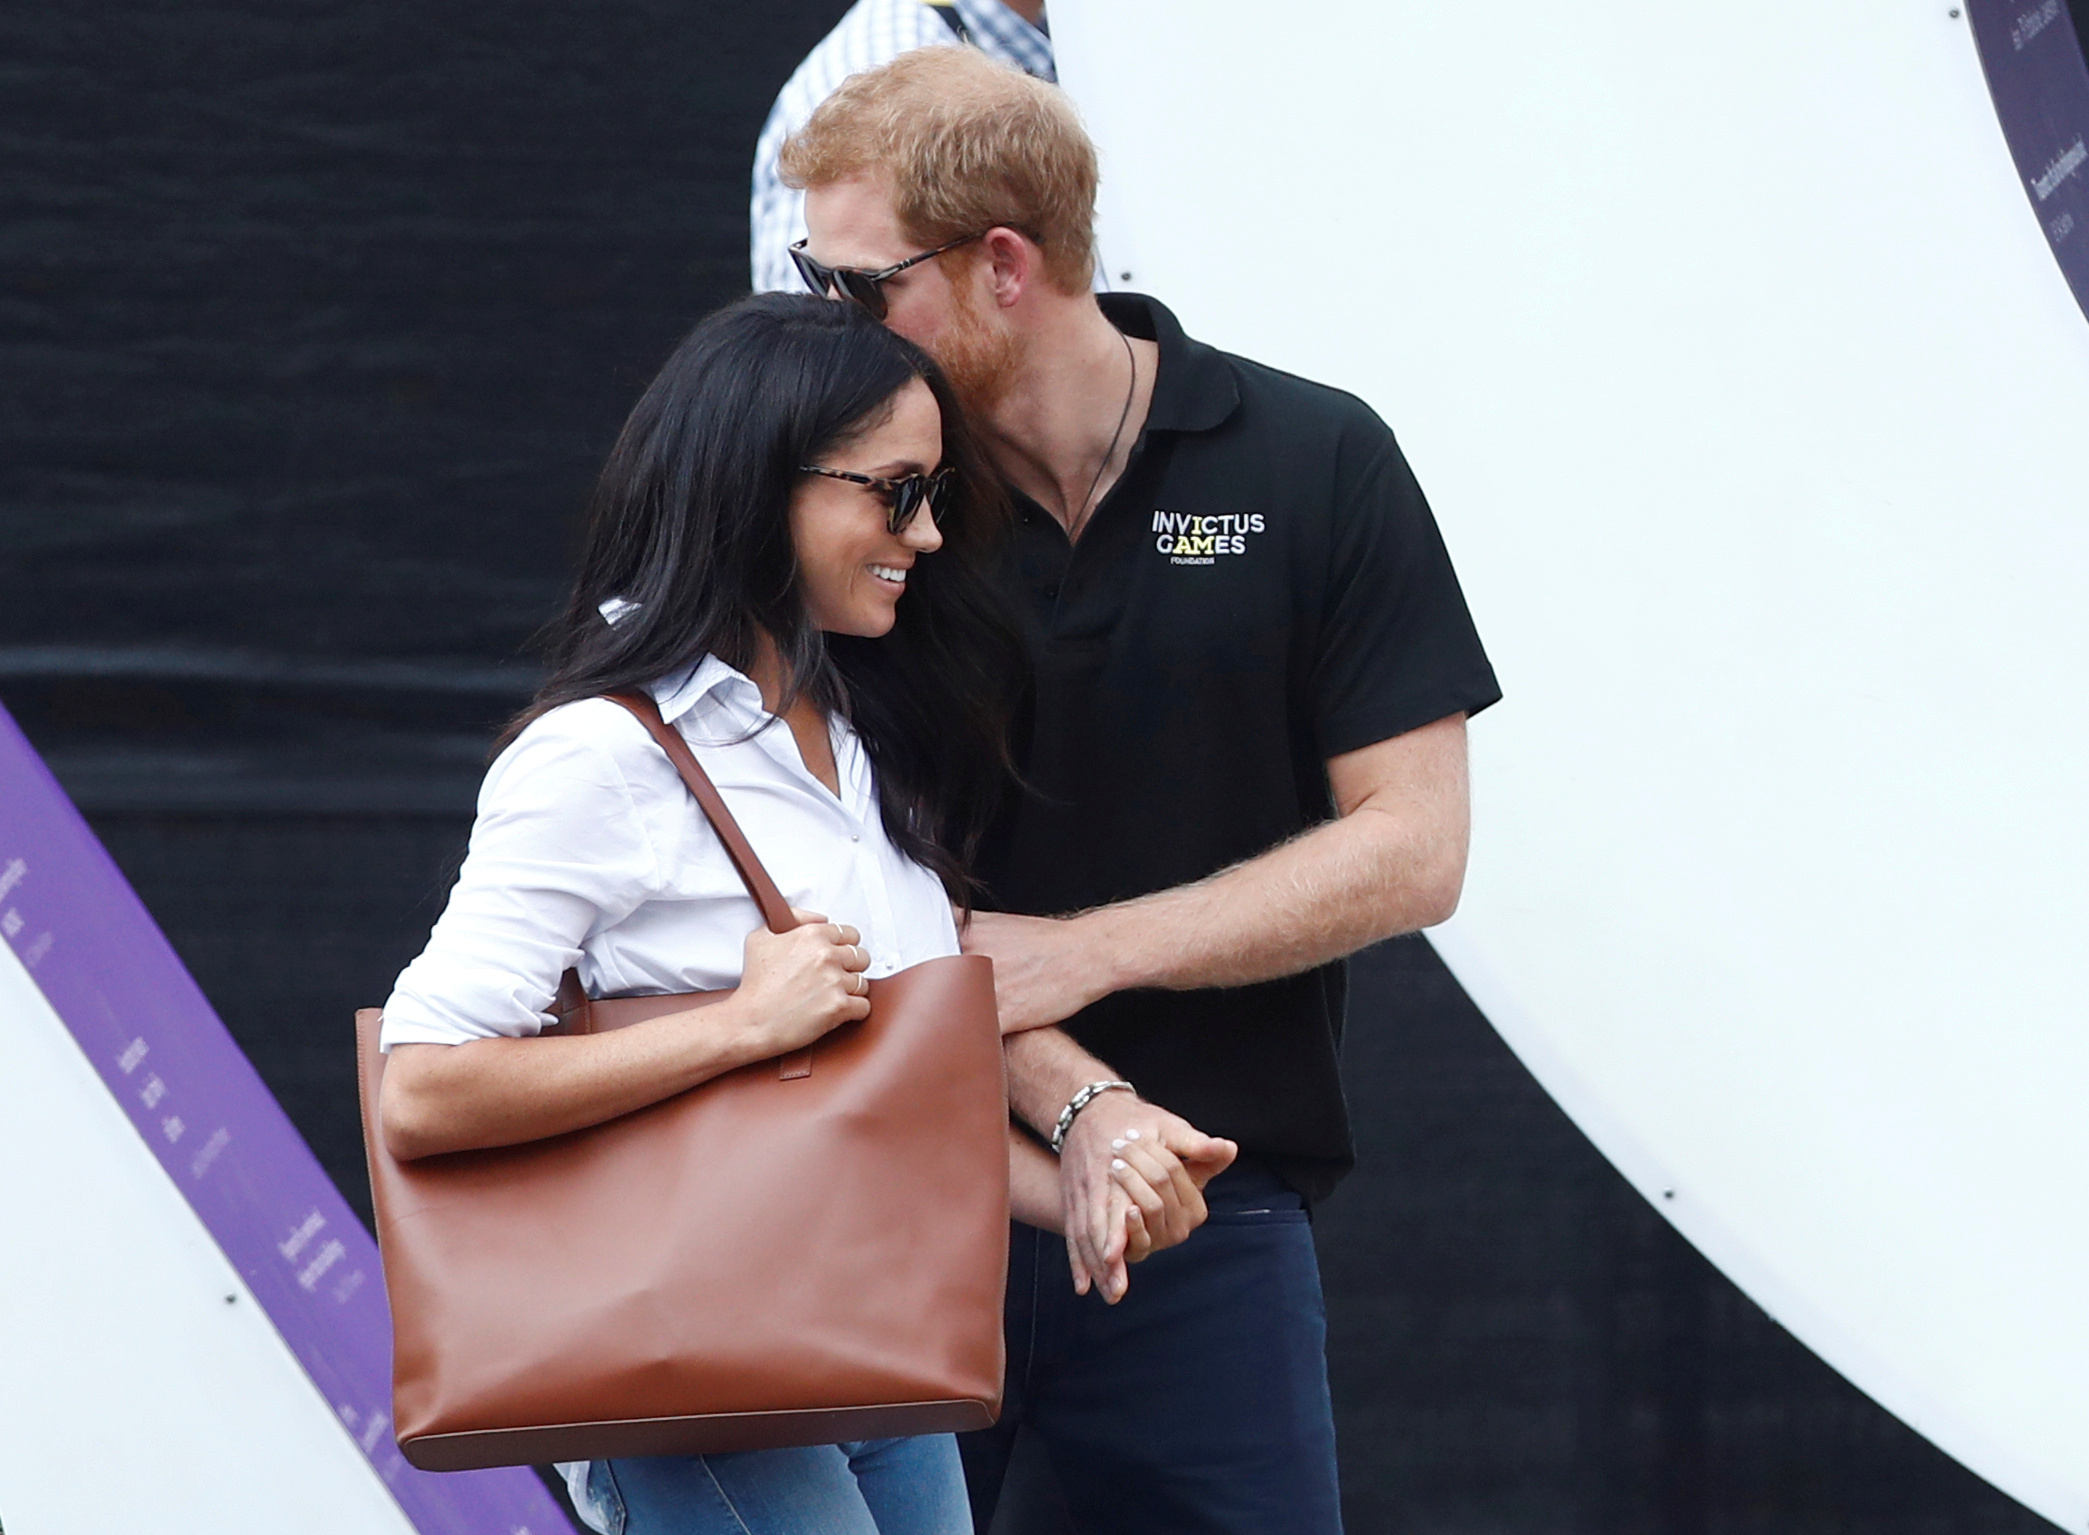 Prince Harry arrives with girlfriend actress Meghan Markle at the wheelchair tennis event during the Invictus Games in Toronto, Canada, September 25, 2017. REUTERS/Mark Blinch